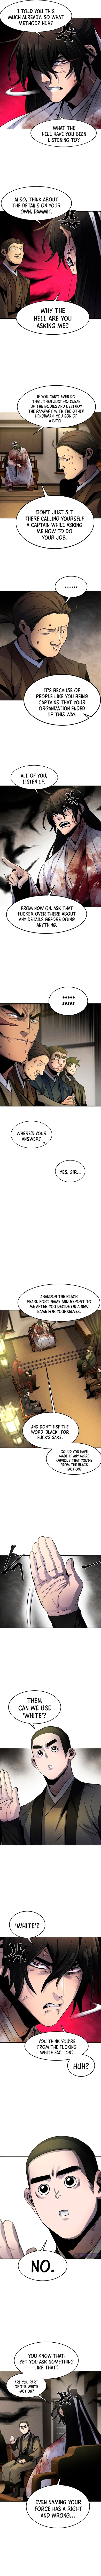 the-return-of-the-crazy-demon-chap-33-3